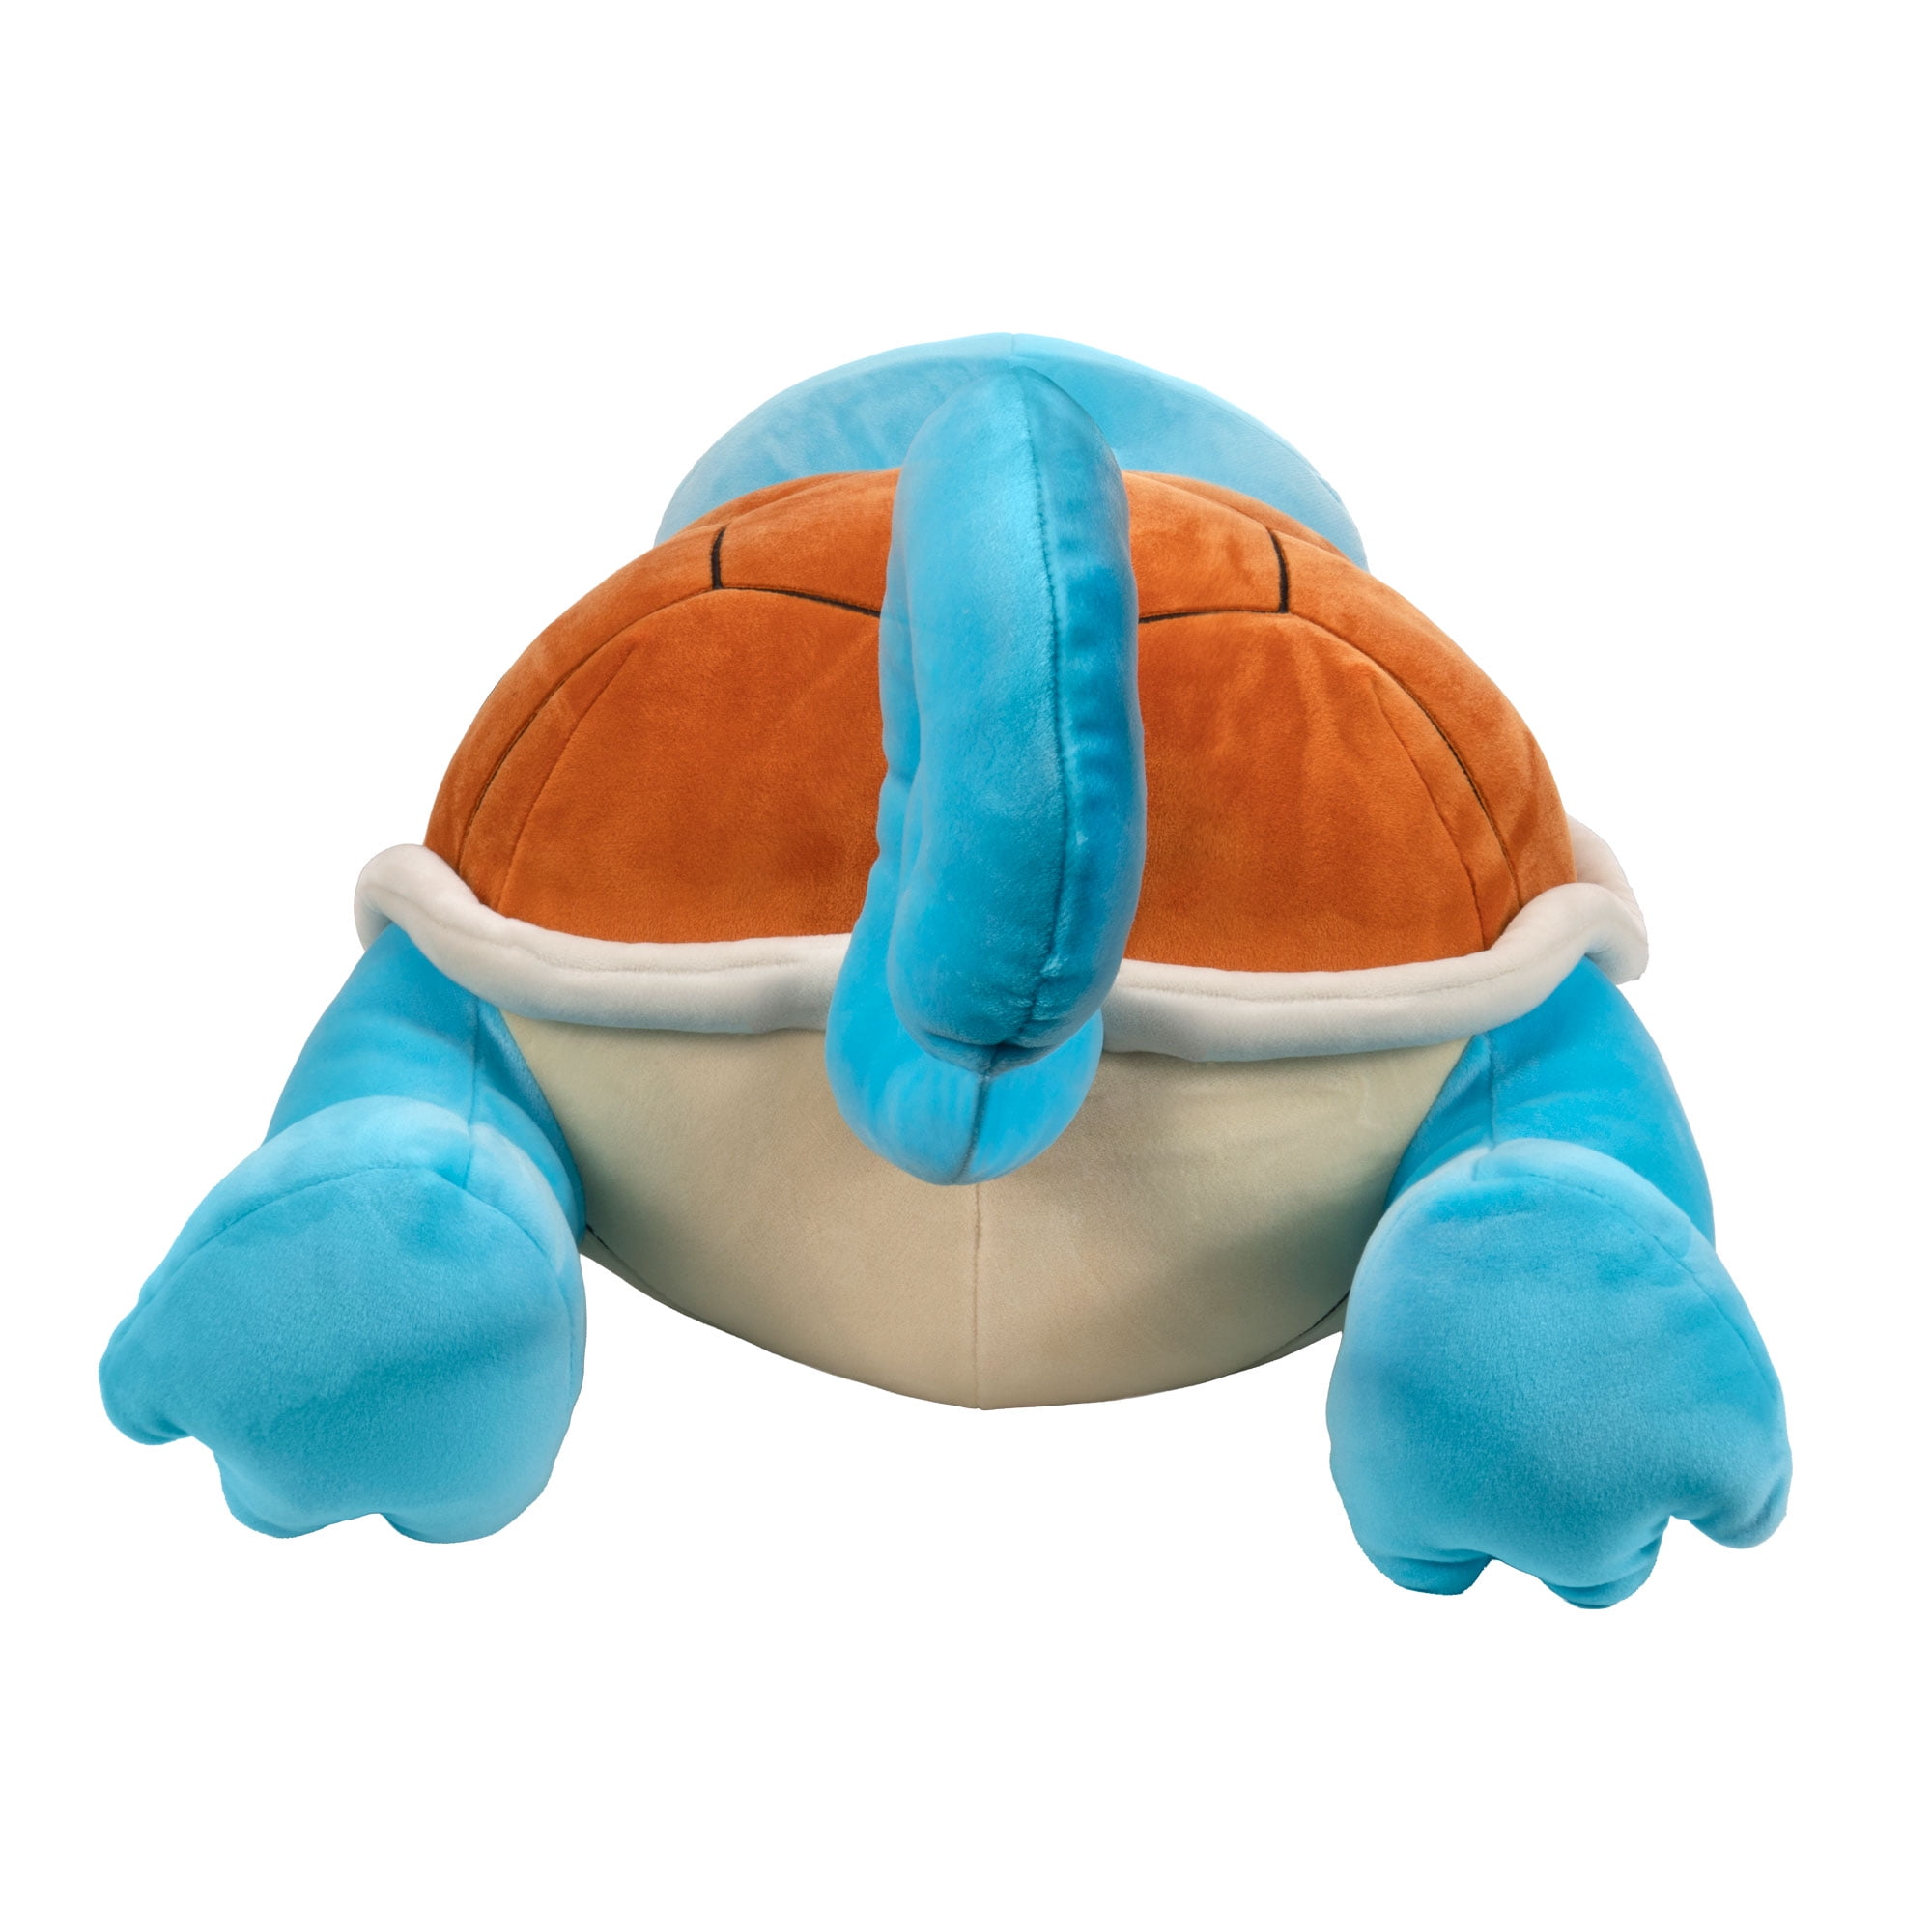 Plush Backpack - - Squirtle Green/Brown 15 Soft Doll New 712157 